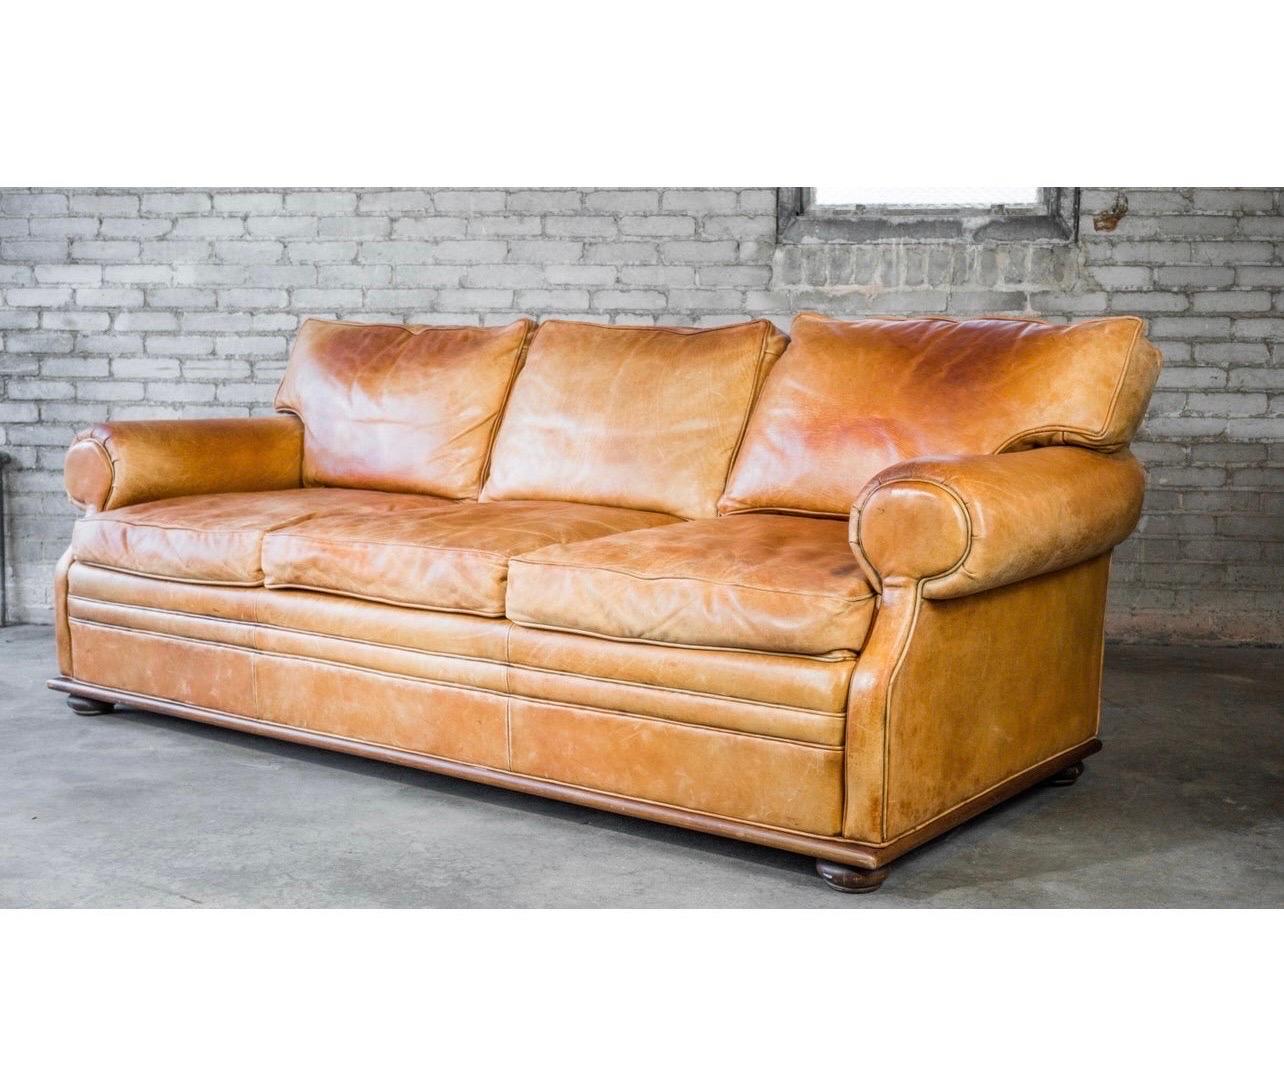 Elegant and rare Ralph Lauren saddle leather sofa with lovely patina. Structurally sound. Features large round rolling armrests, an angular back, and a perfect blend of modern style mixed with English traditional attributes. The butter soft leather